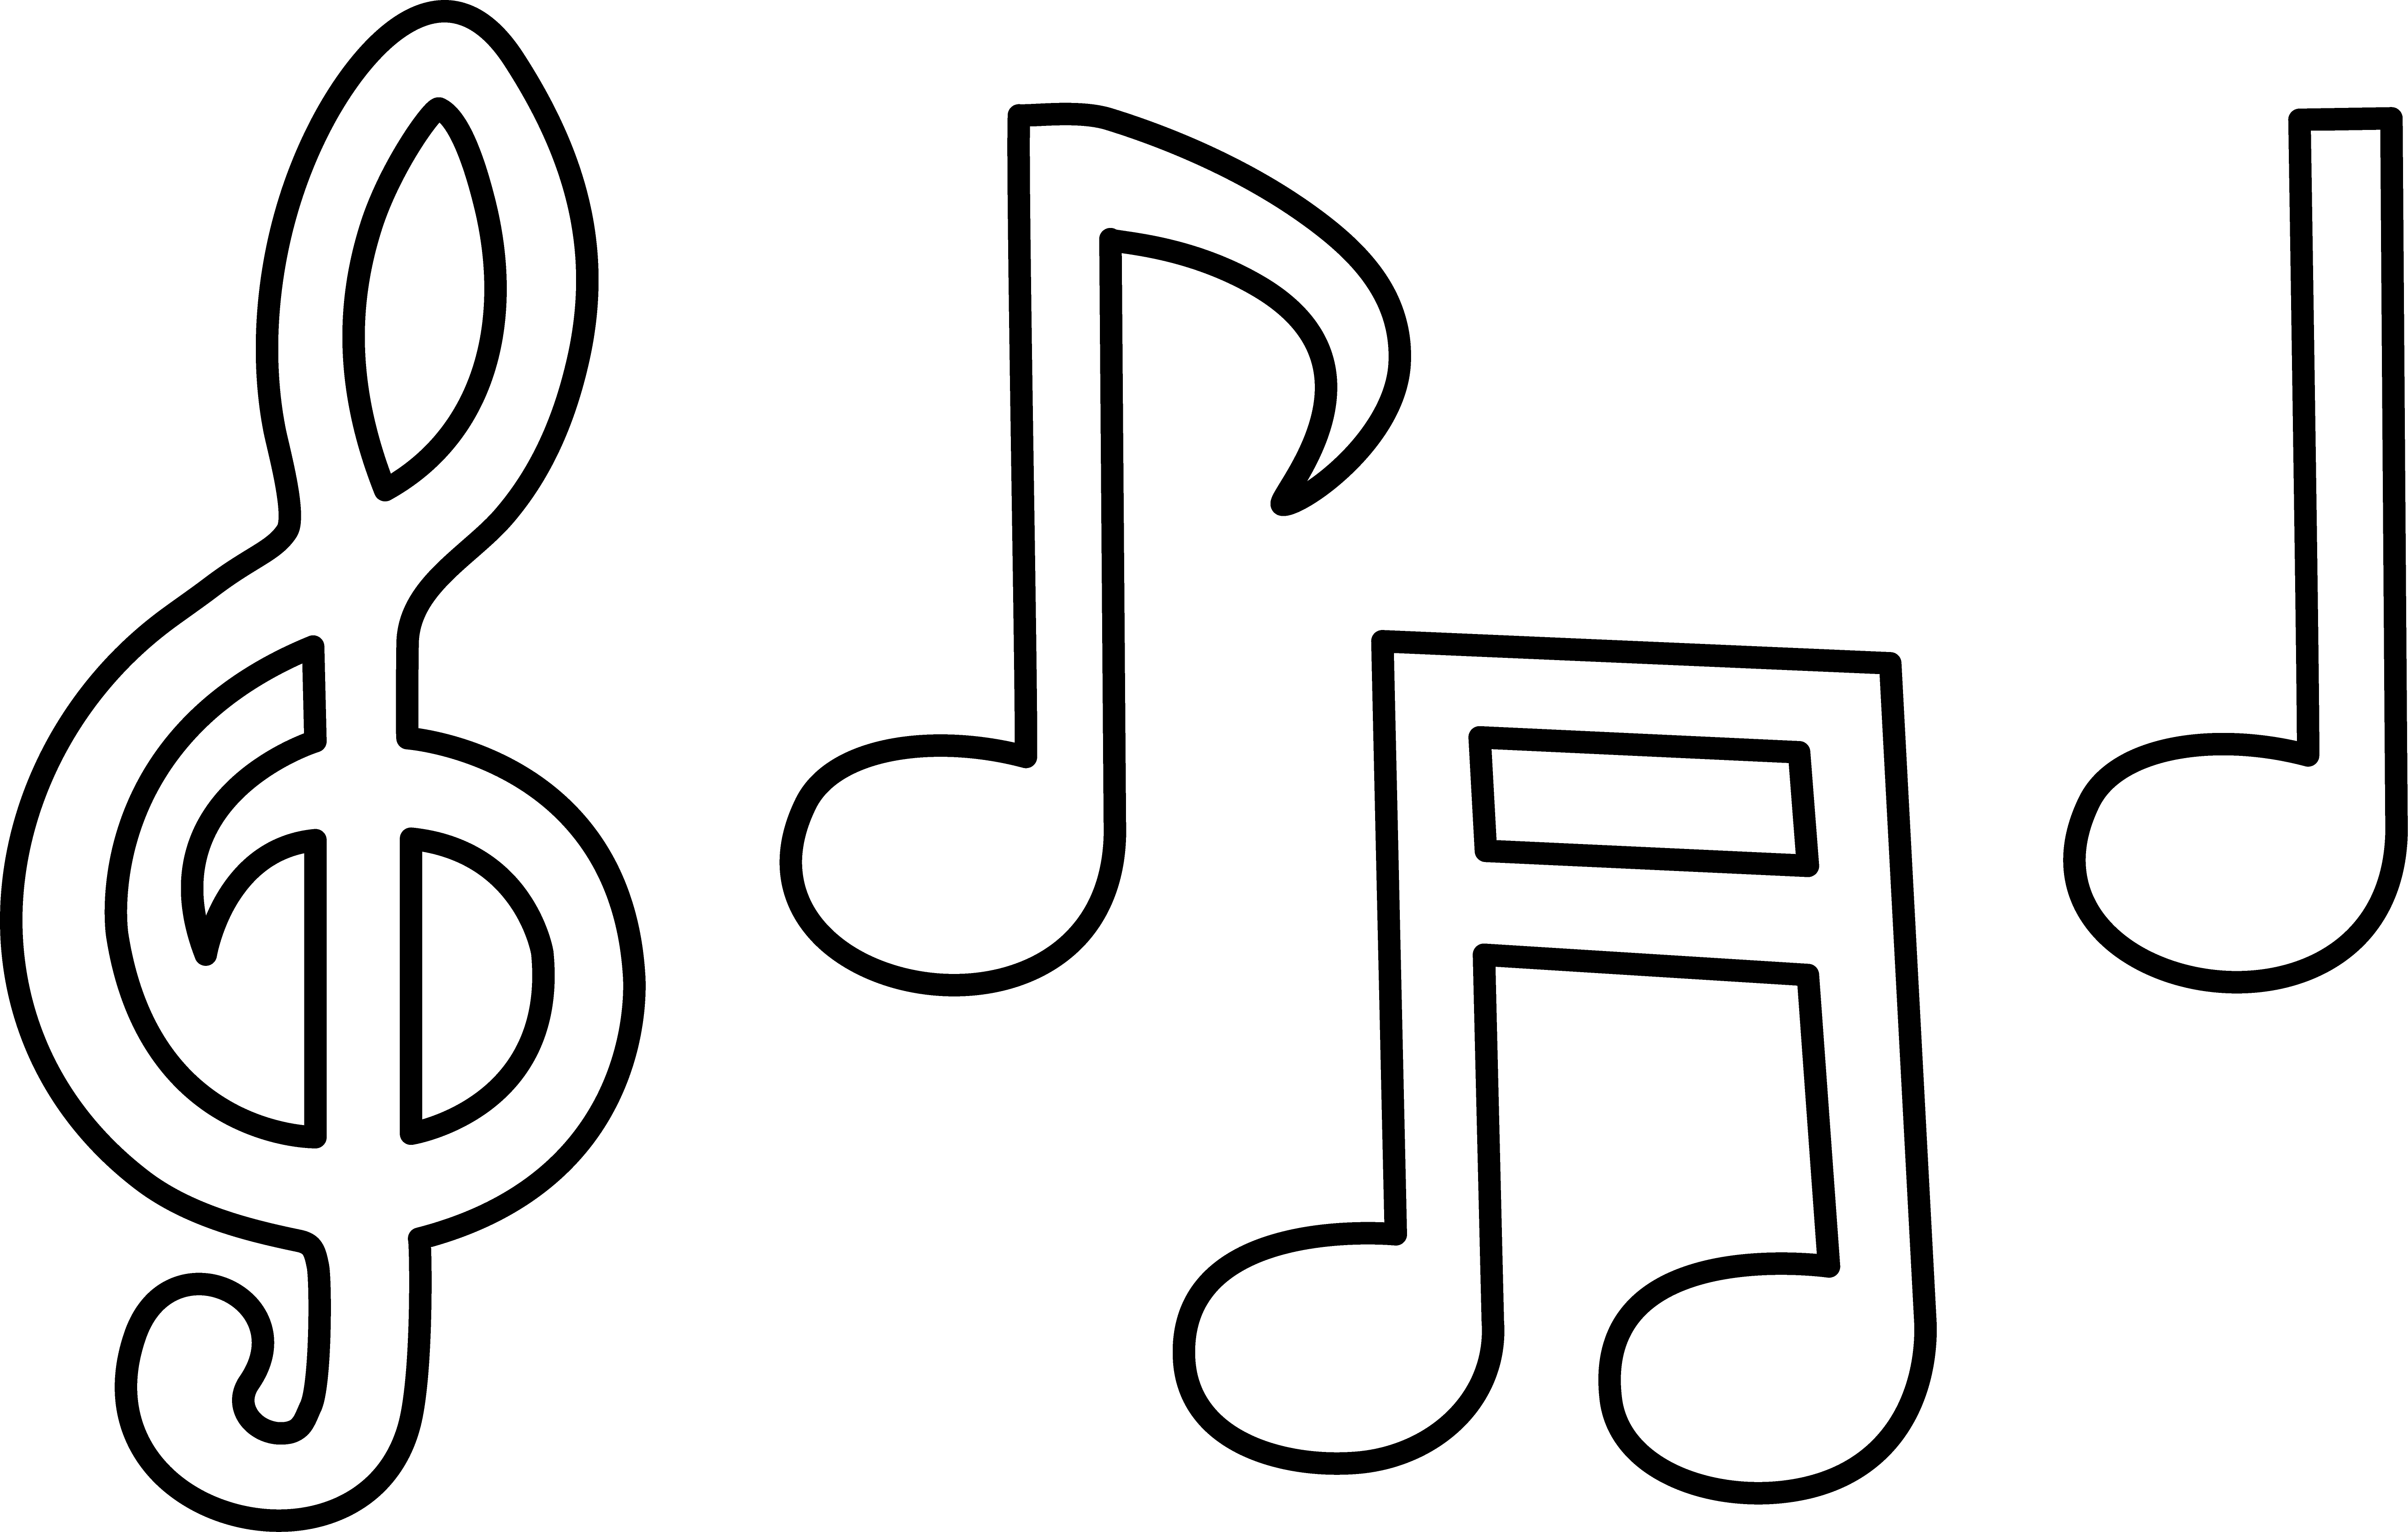 Music Notes clipart black and white #6